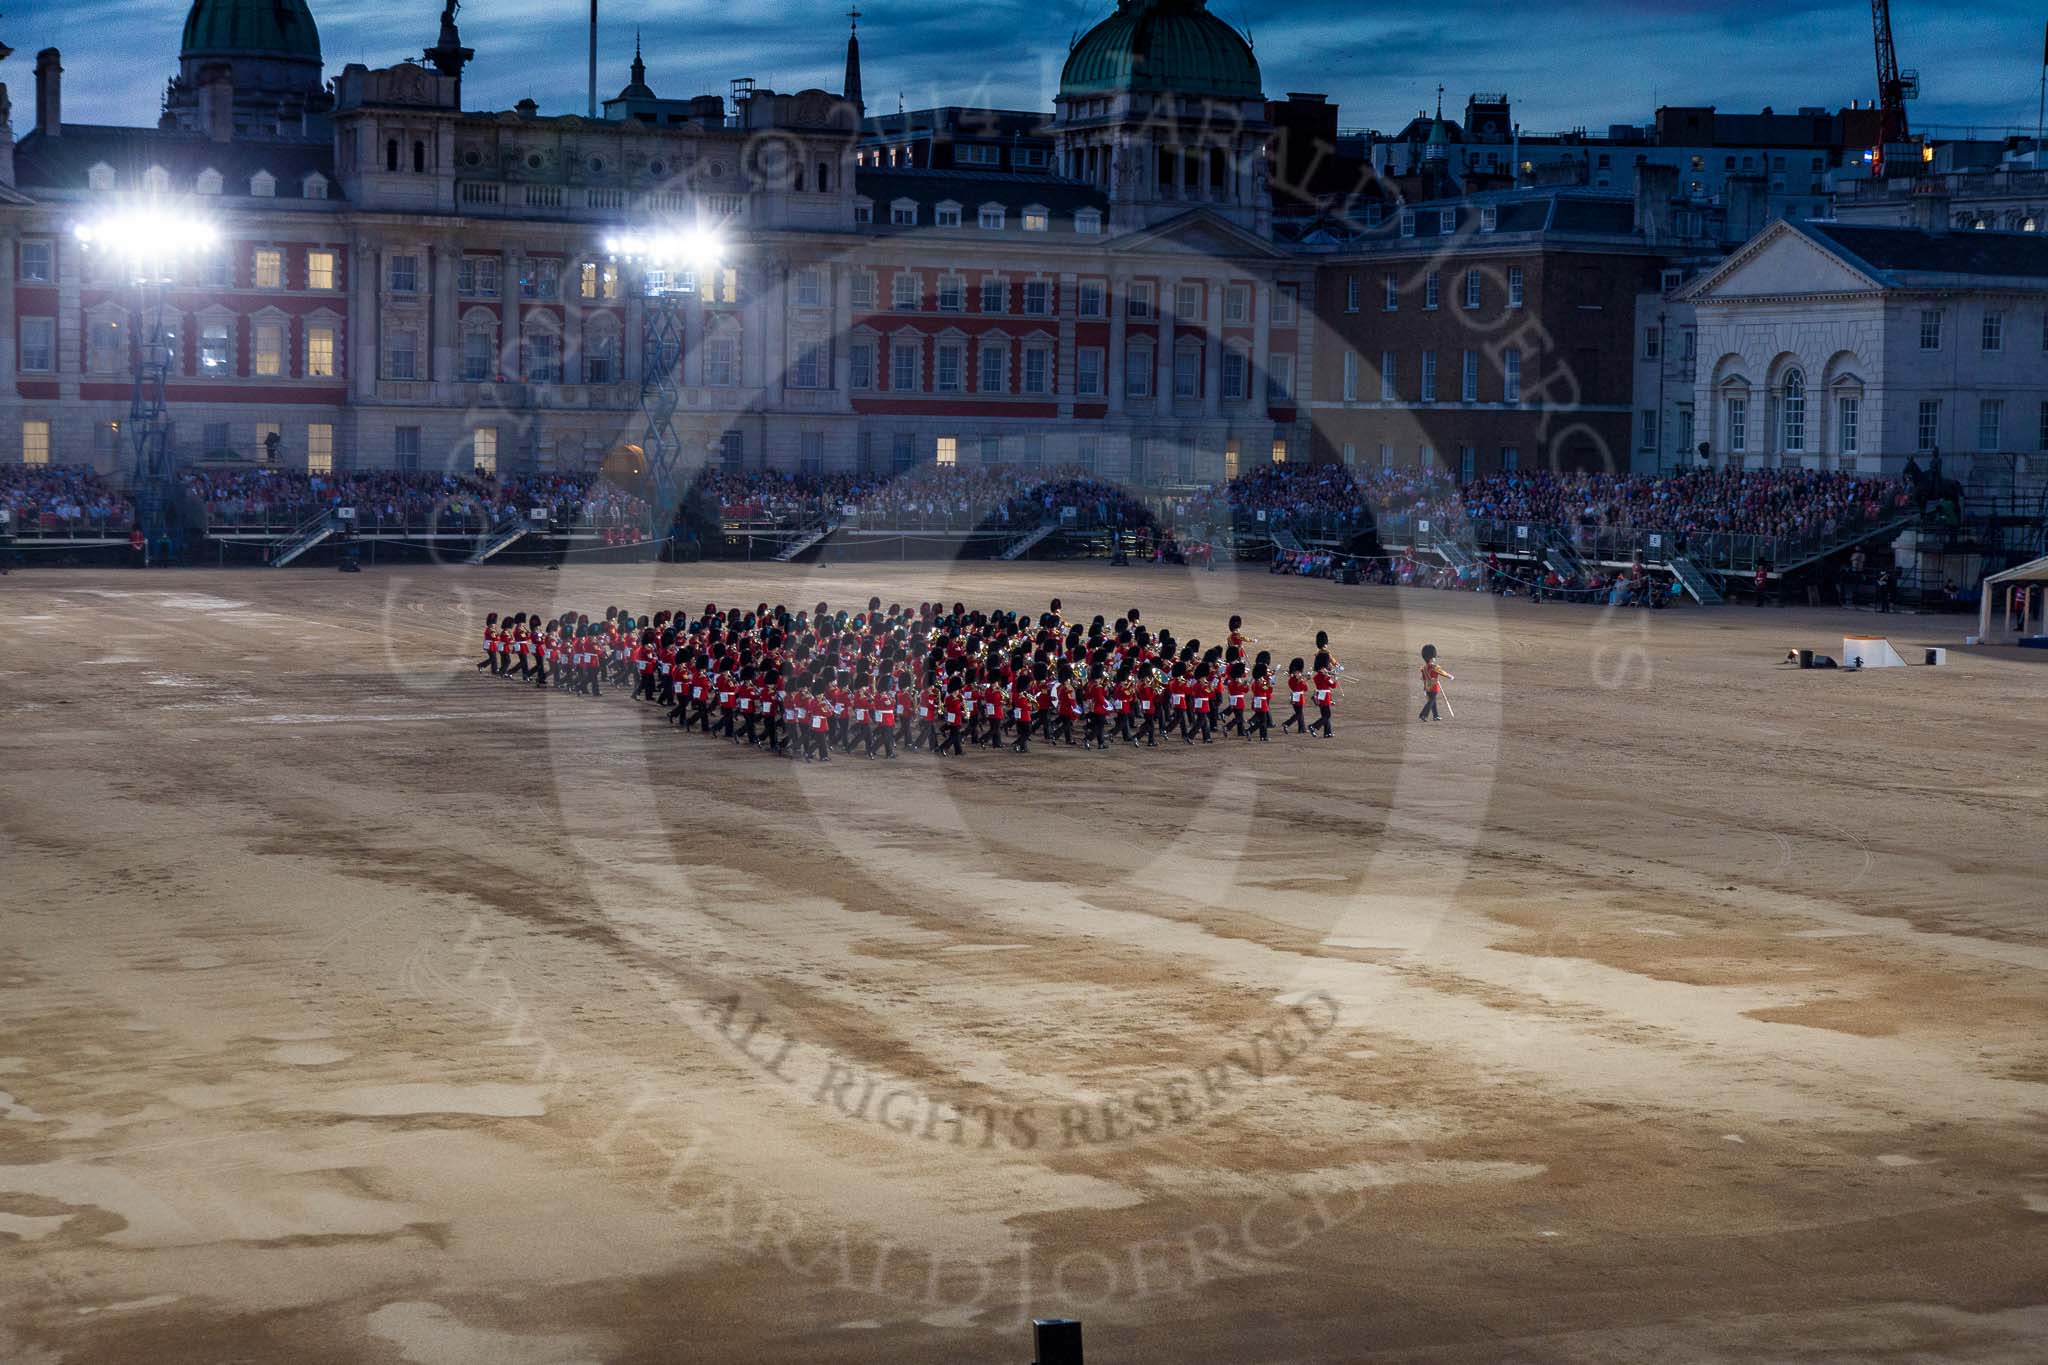 Beating Retreat 2014.
Horse Guards Parade, Westminster,
London SW1A,

United Kingdom,
on 11 June 2014 at 21:36, image #362